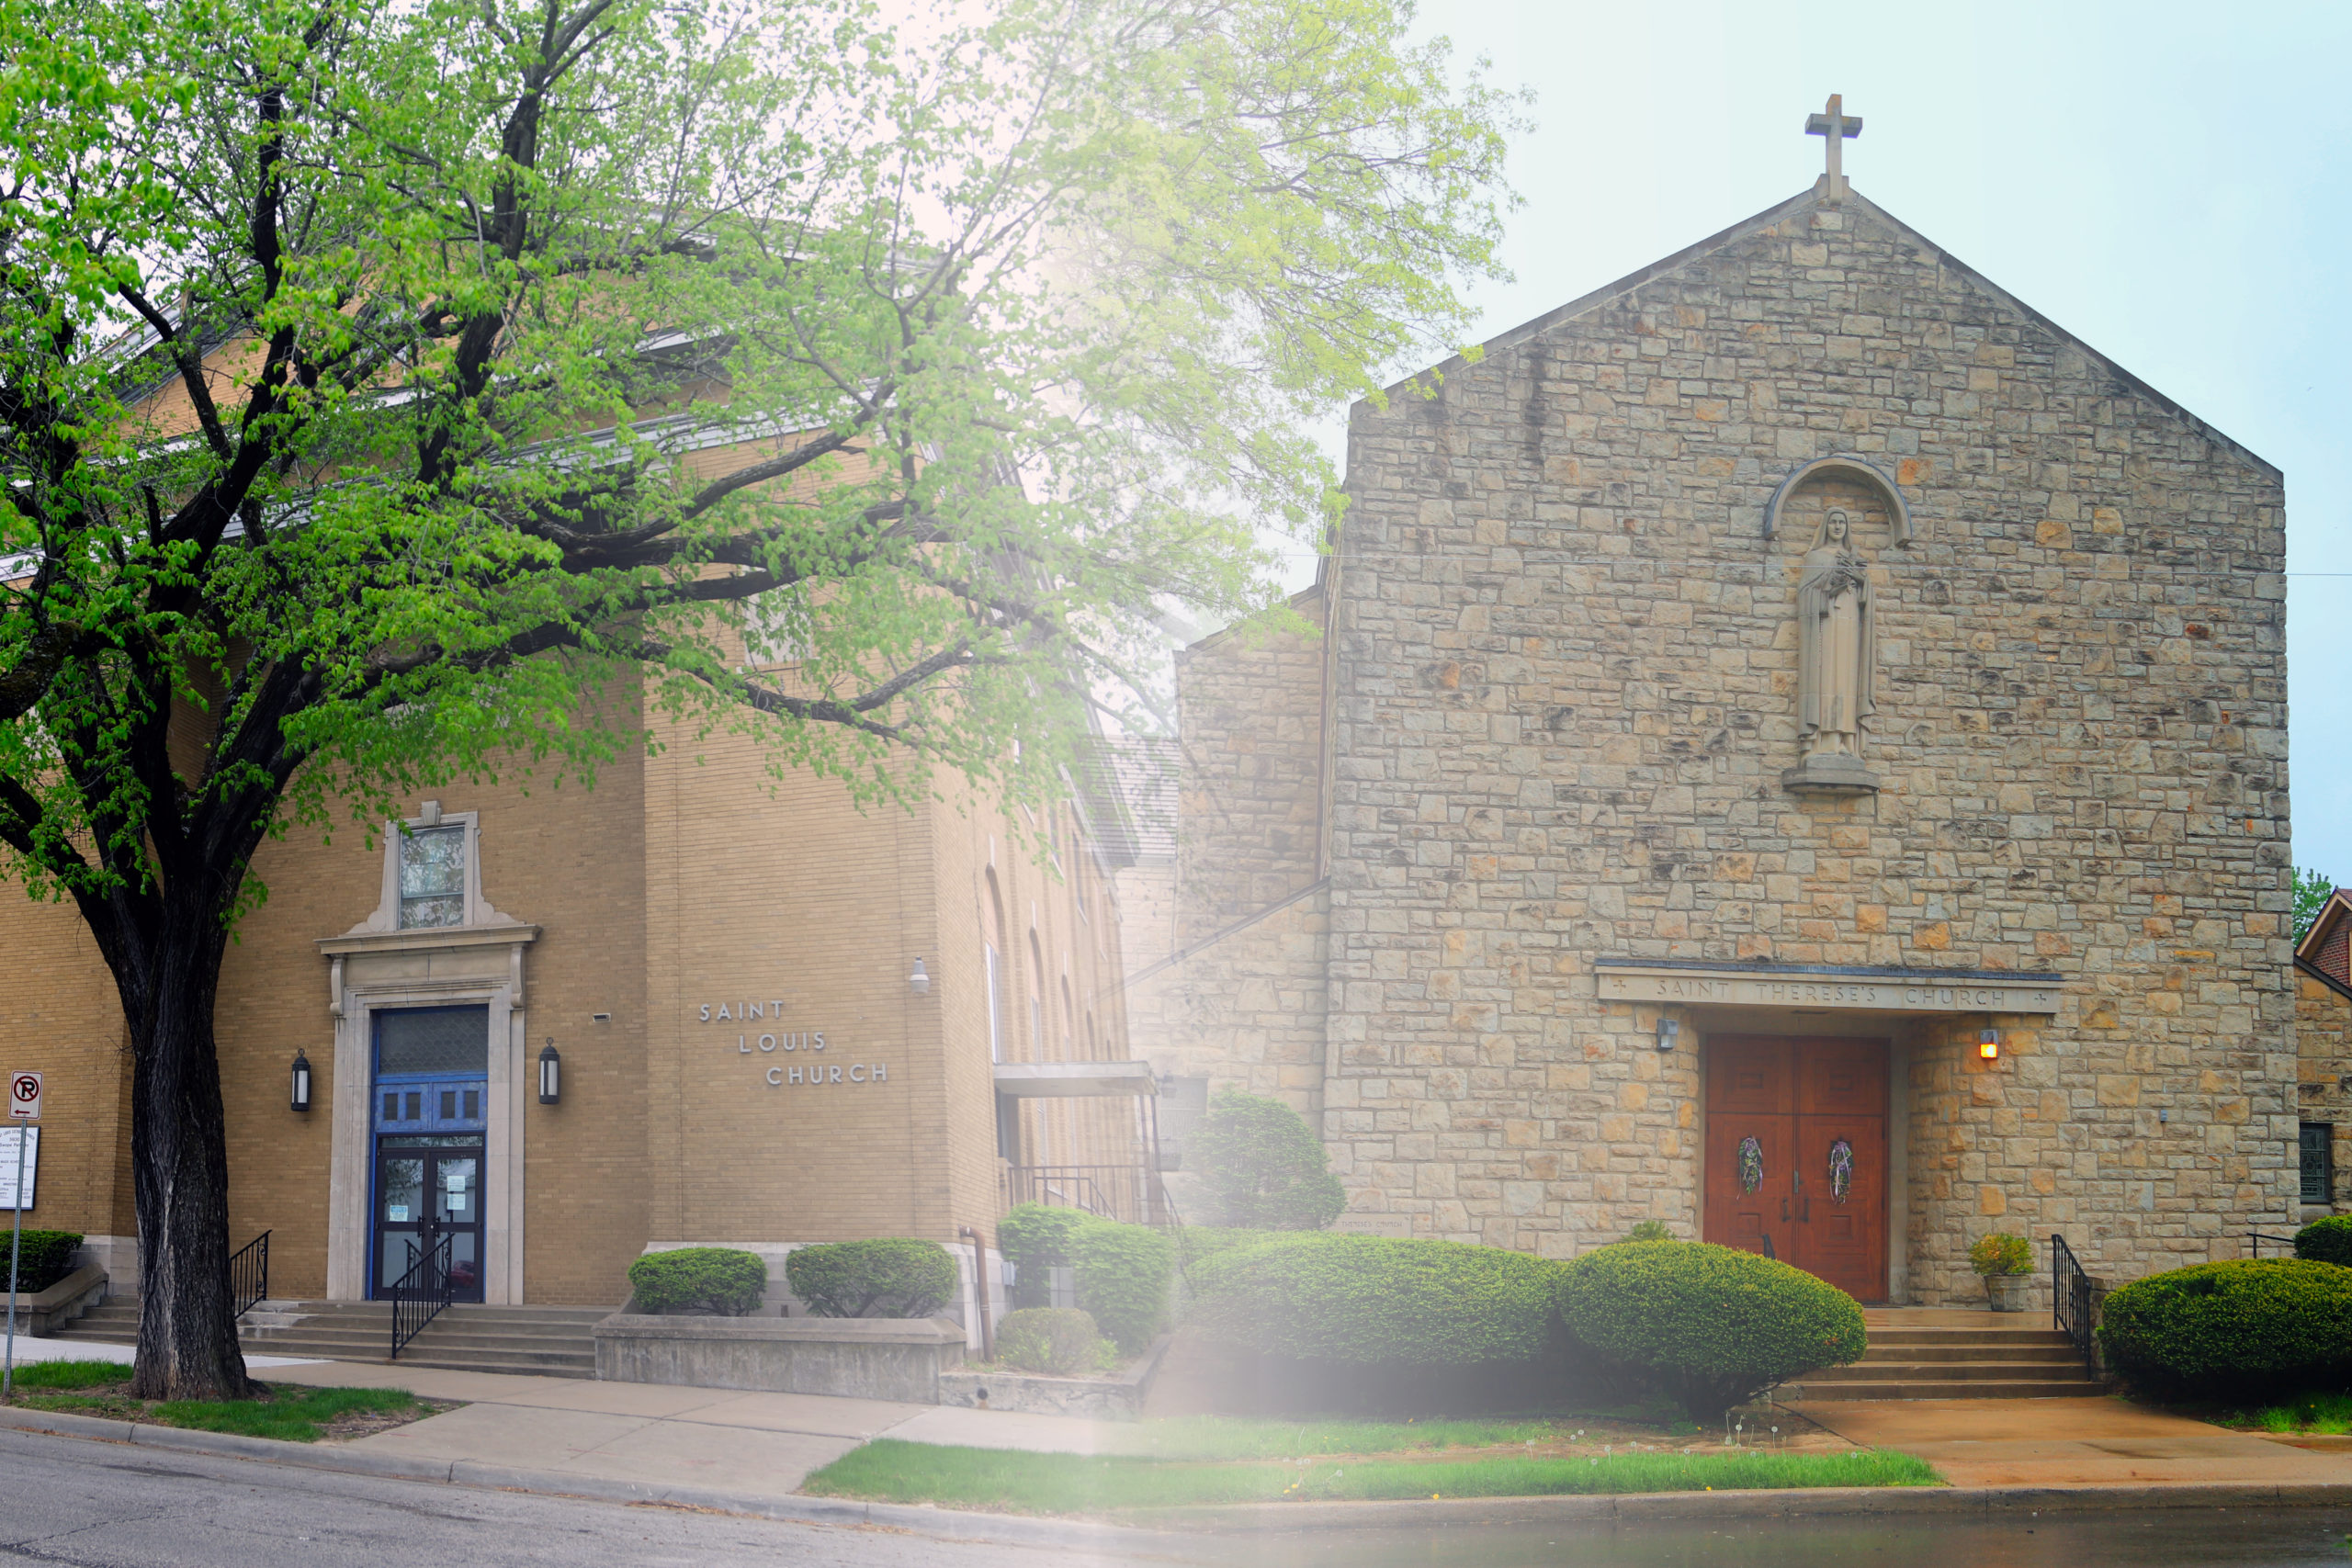 St. Louis Catholic Church Youth Ministry